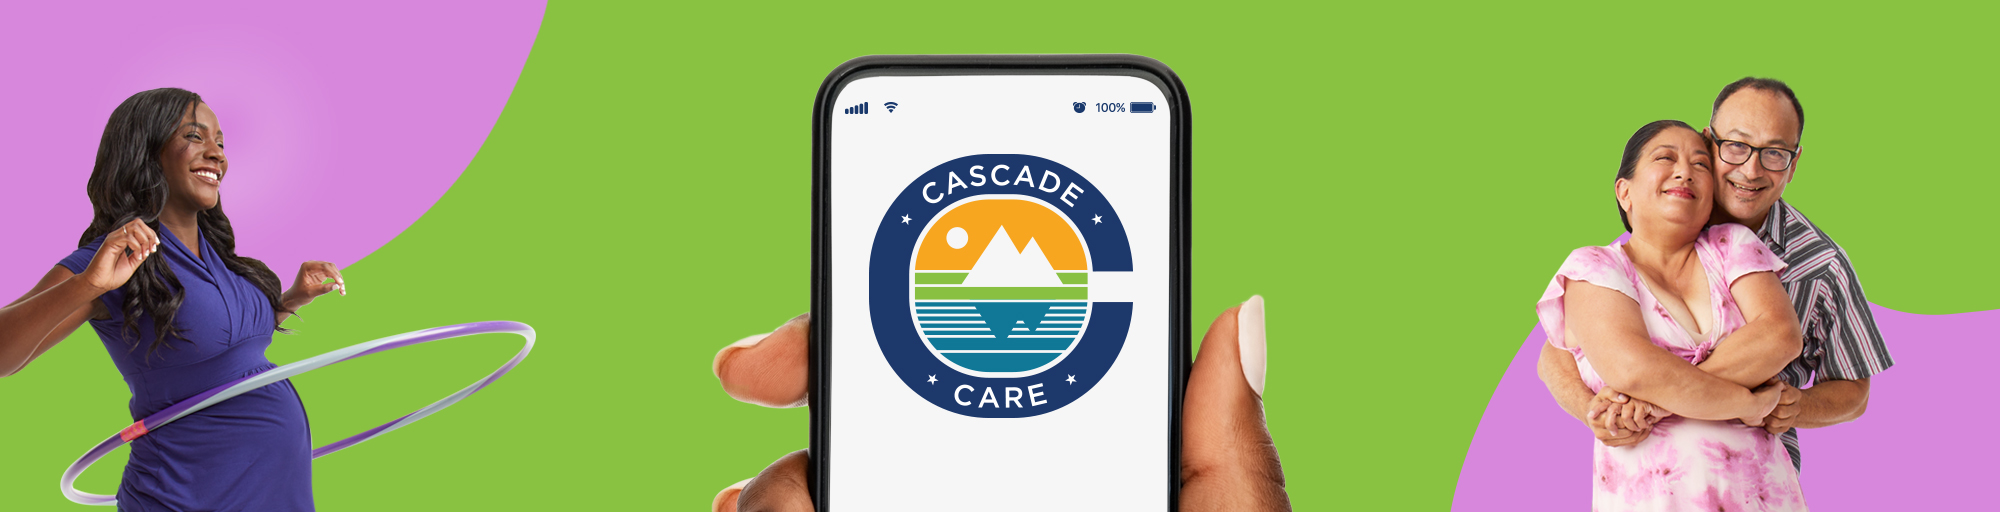 A woman hula hooping, a smart phone with the Cascade Care logo and a smiling couple on a green and lavender background.